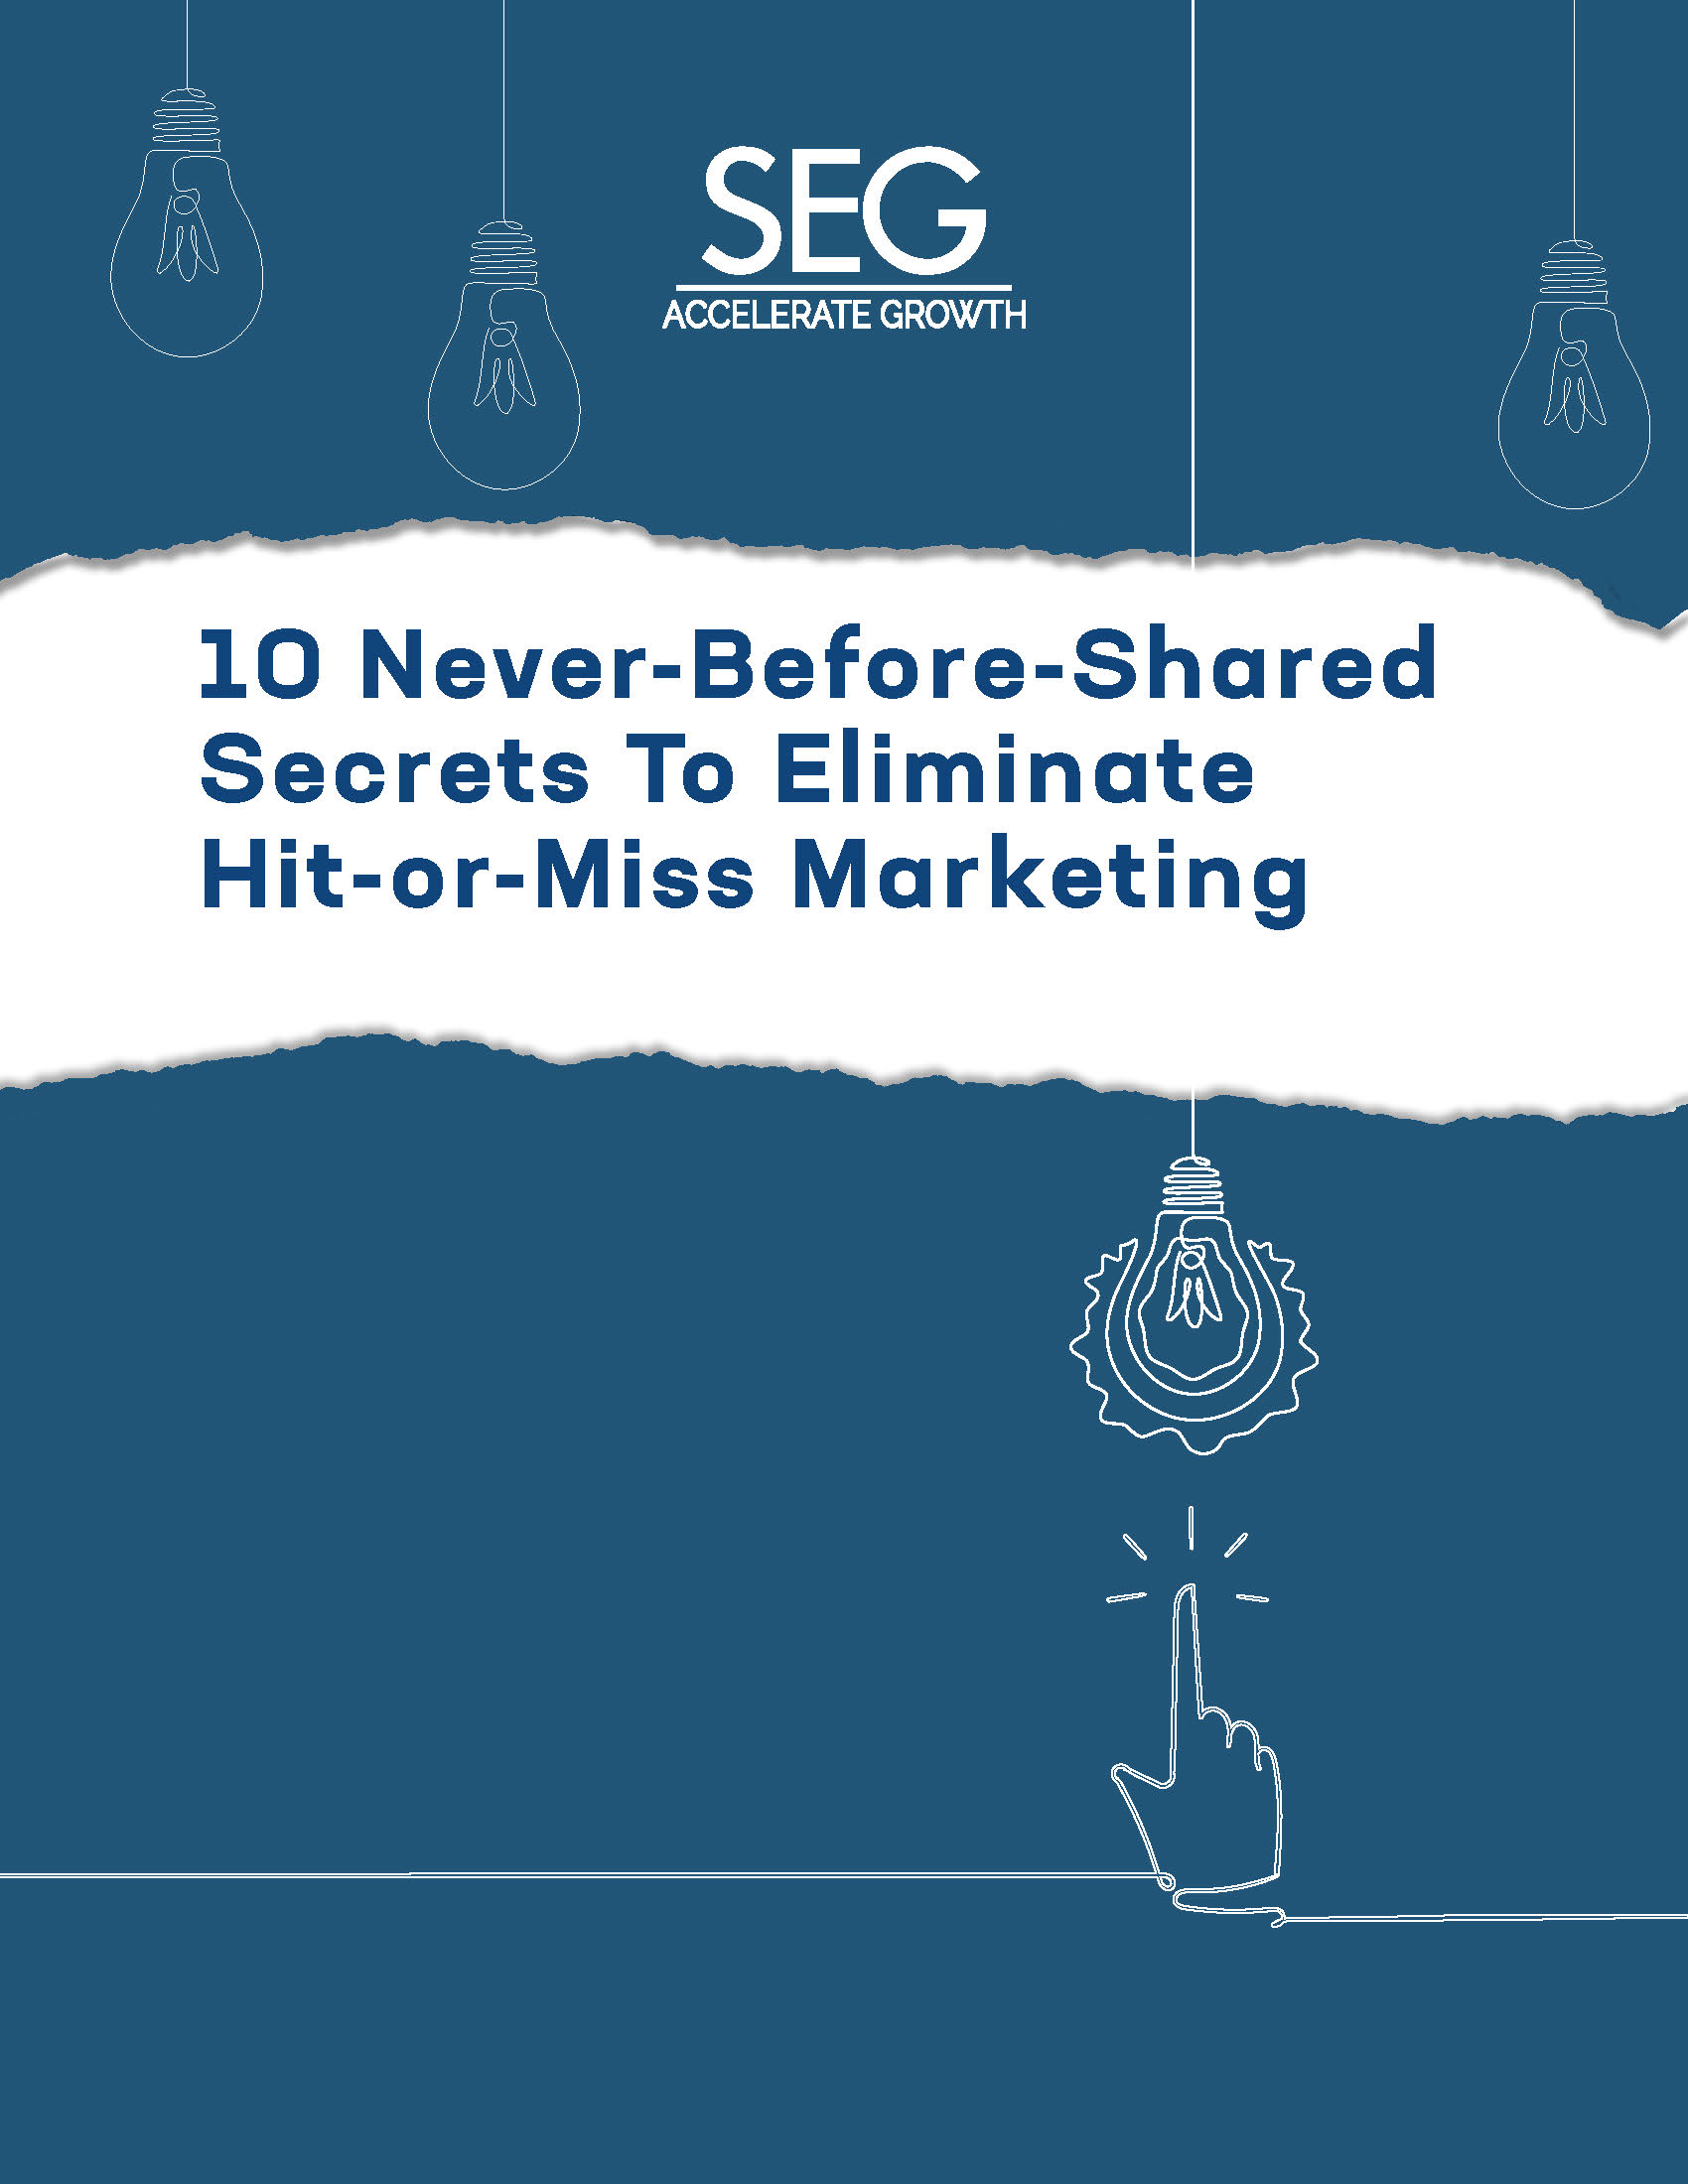 Eliminate hit-or-miss marketing tip sheet cover